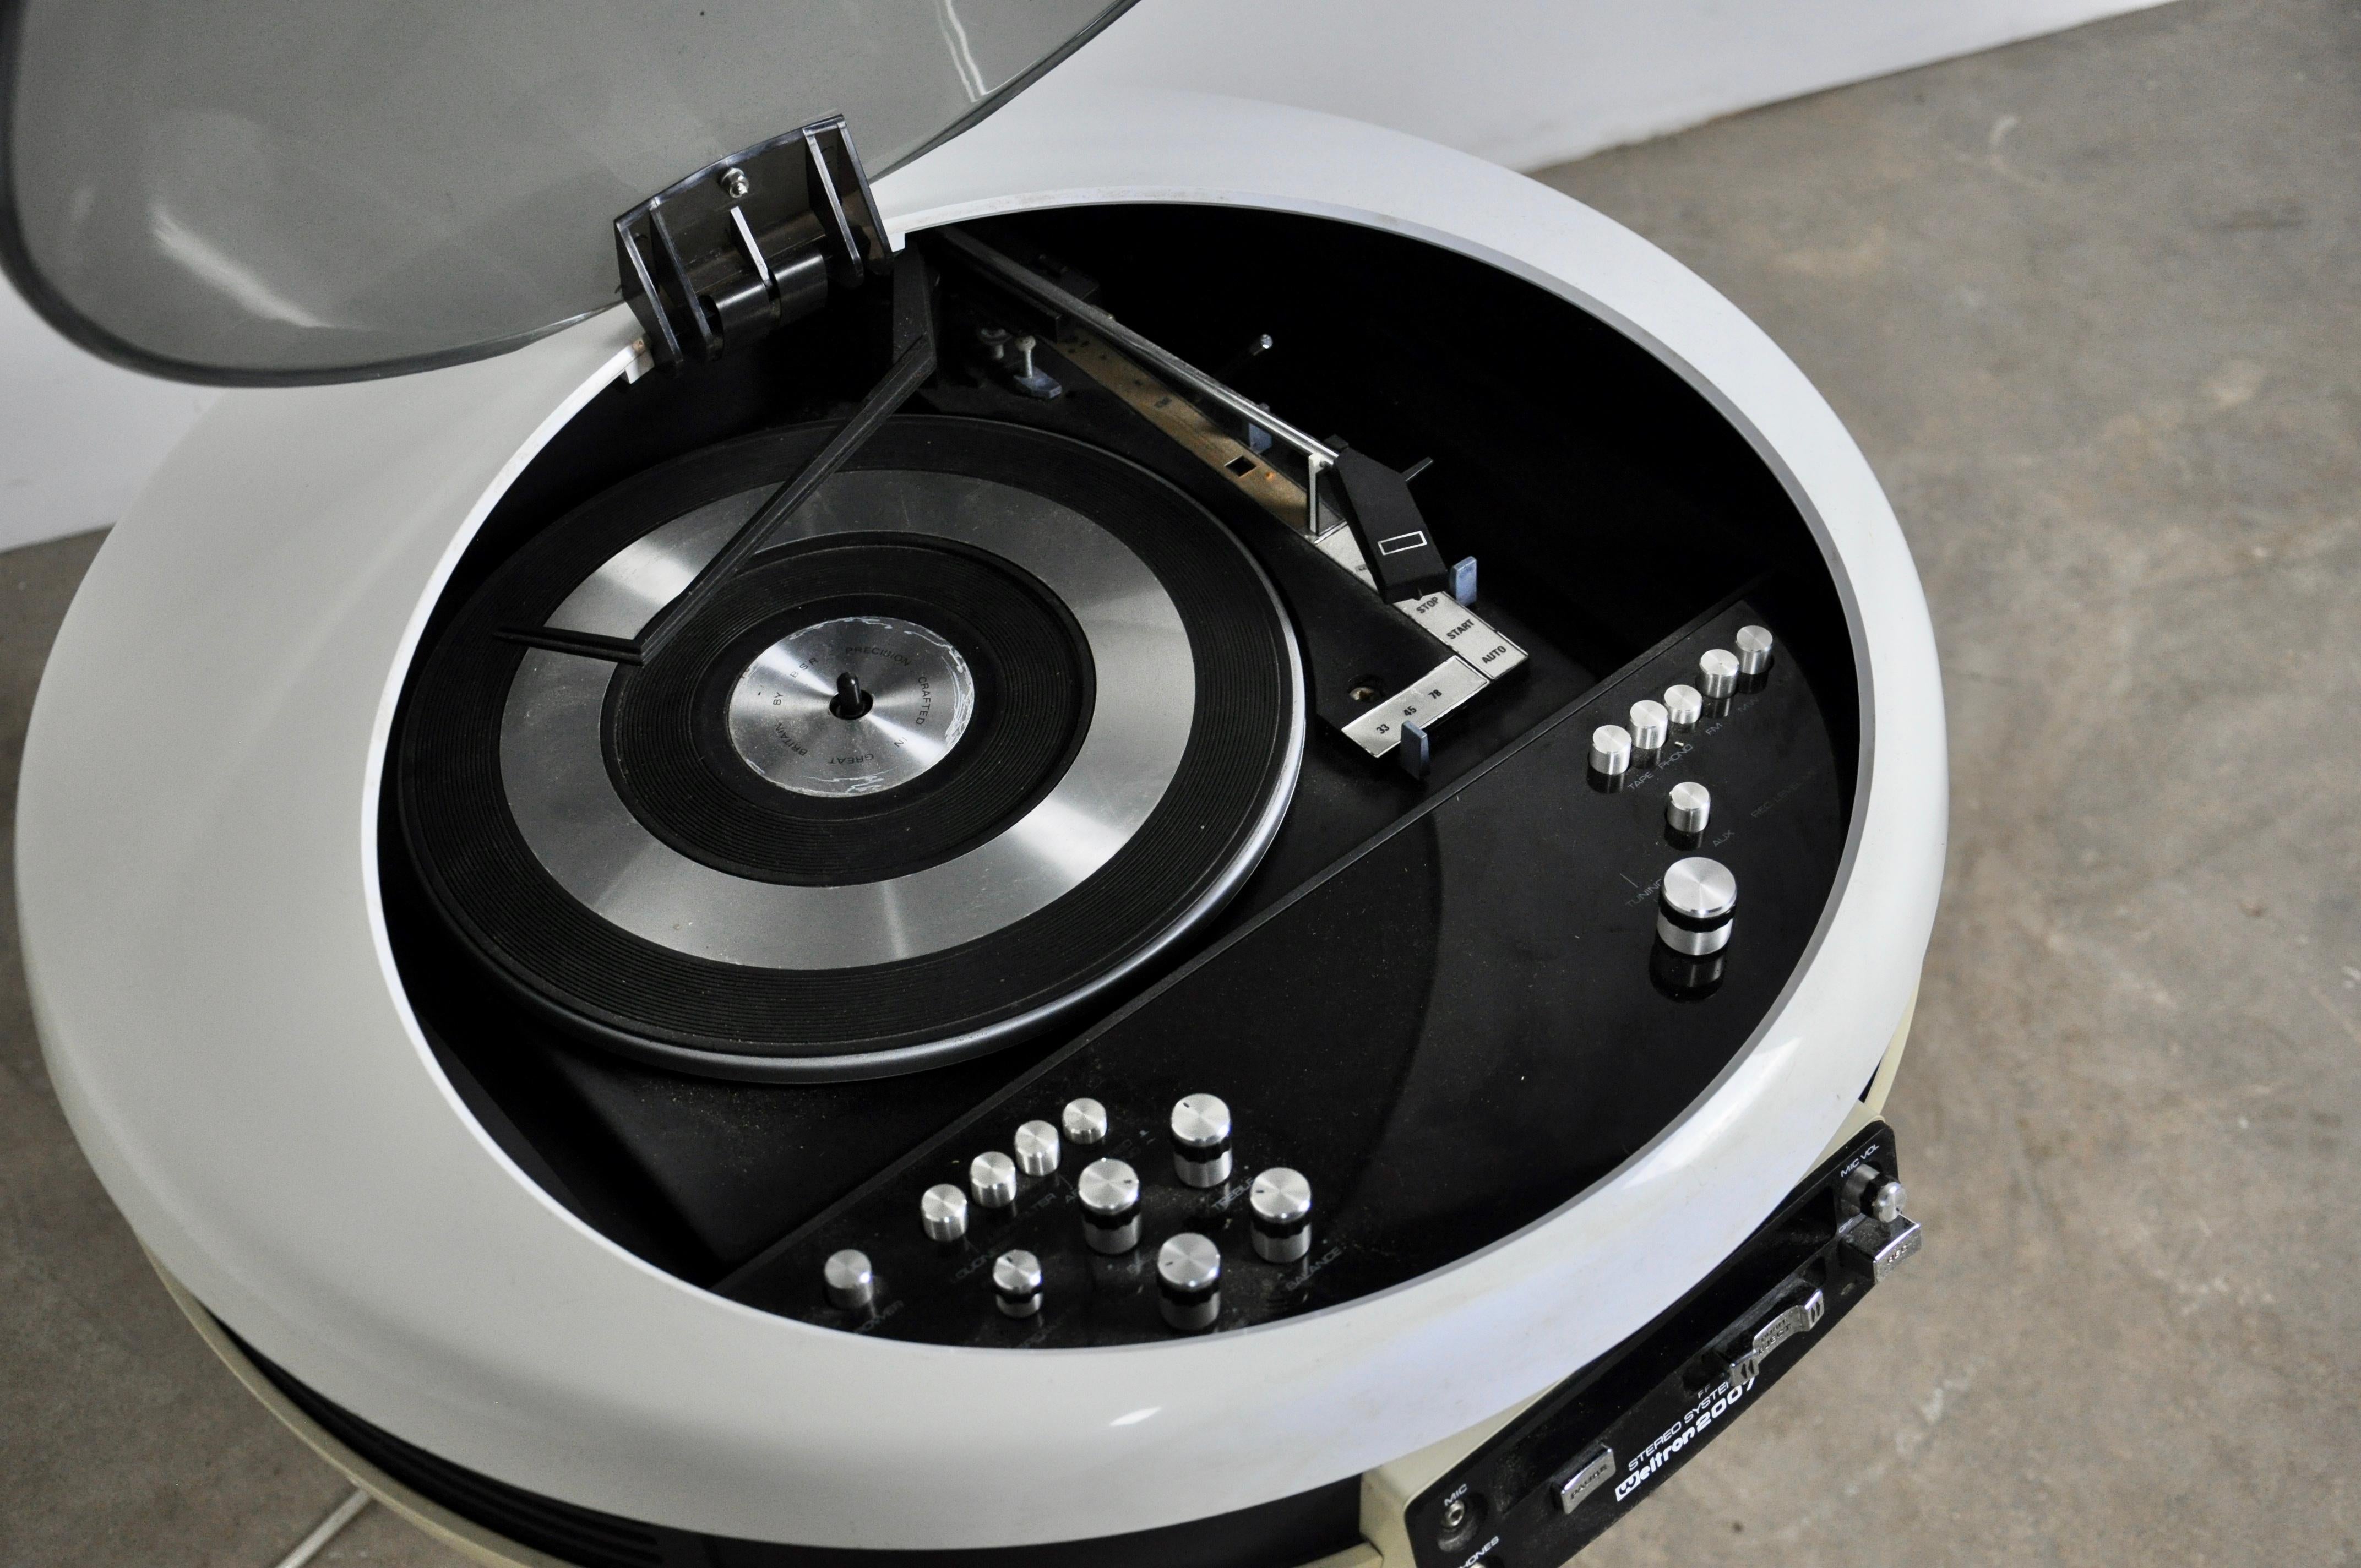 weltron 2007 record player for sale